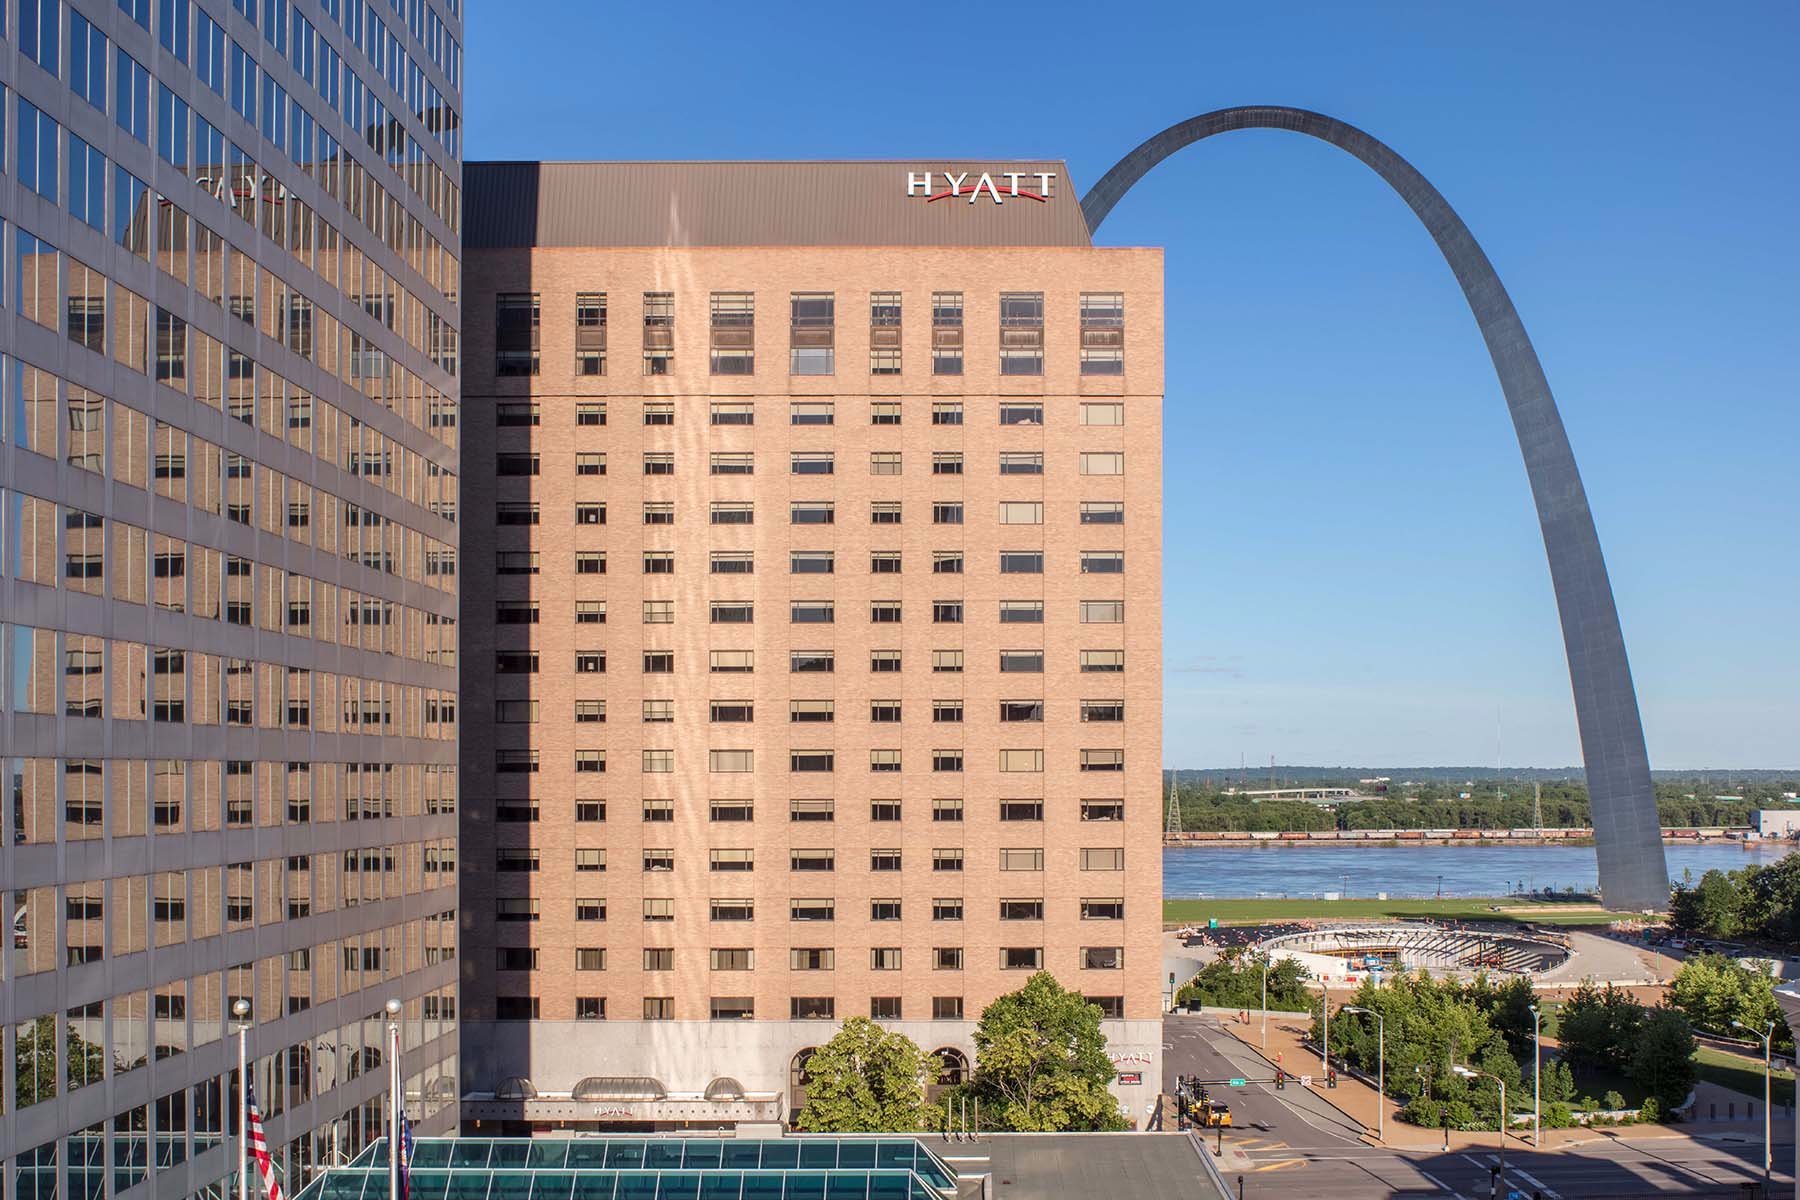 Photo of Hyatt Regency St. Louis at The Arch, St. Louis, MO